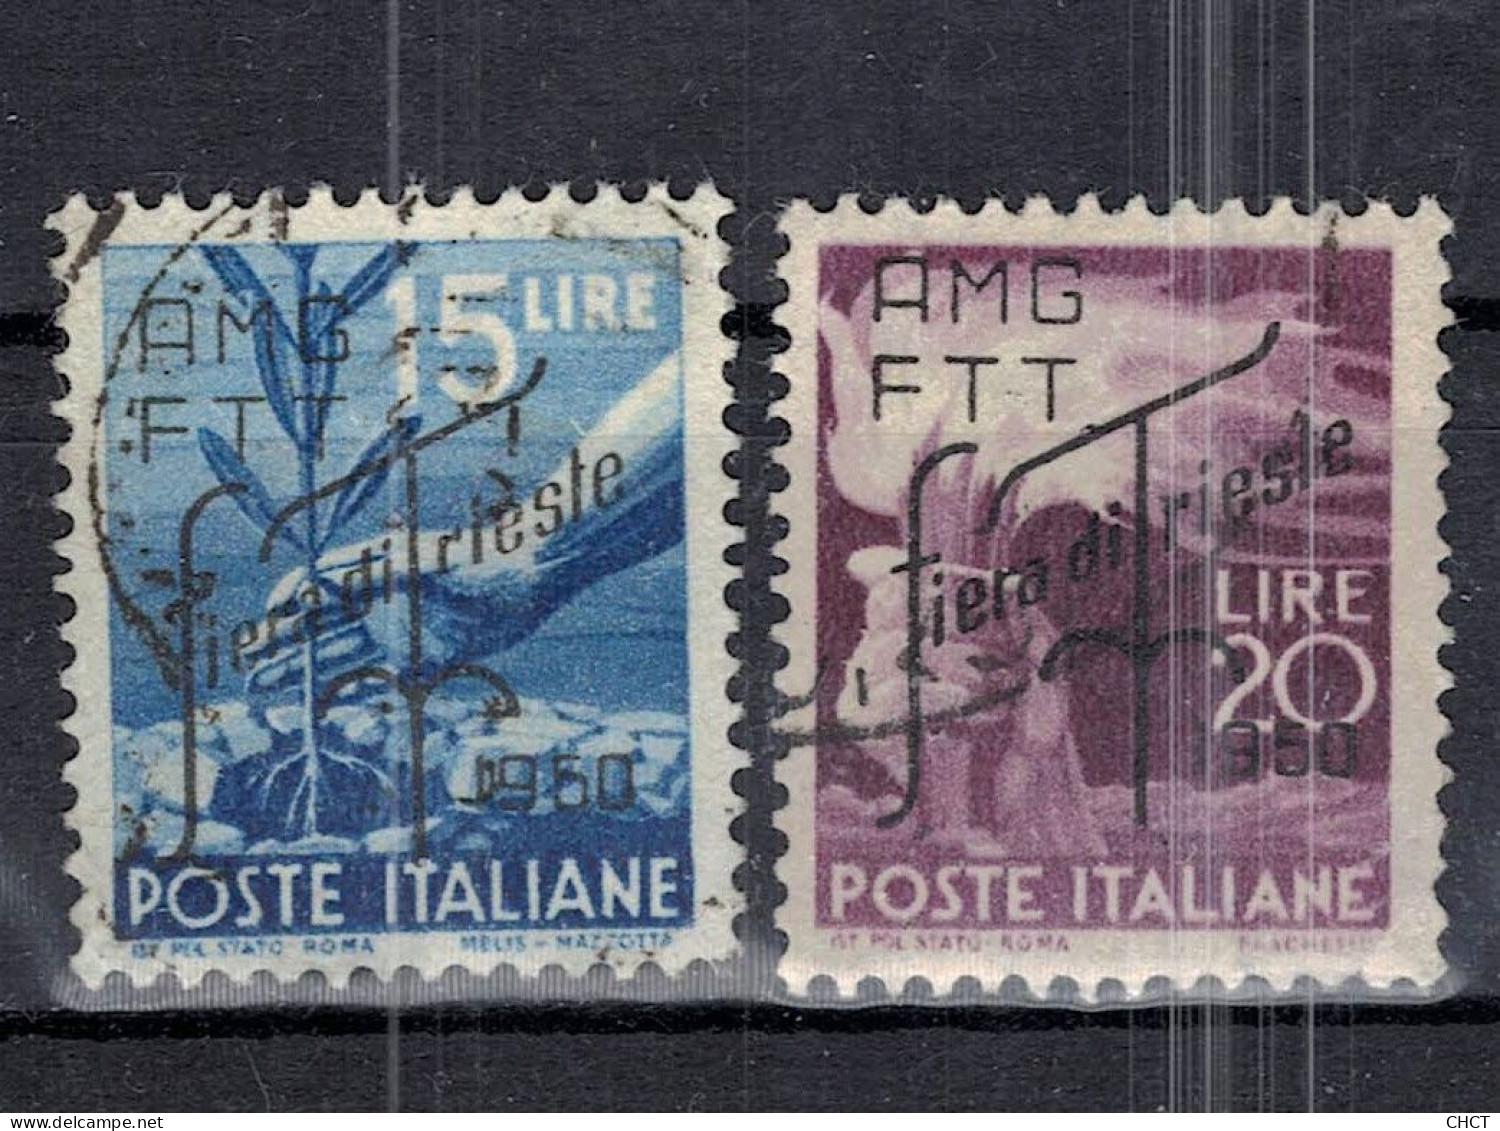 CHCT74 - Motives, AMG-FTT Overprint, Trieste A, 1950, Complete Series, Italy - Afgestempeld